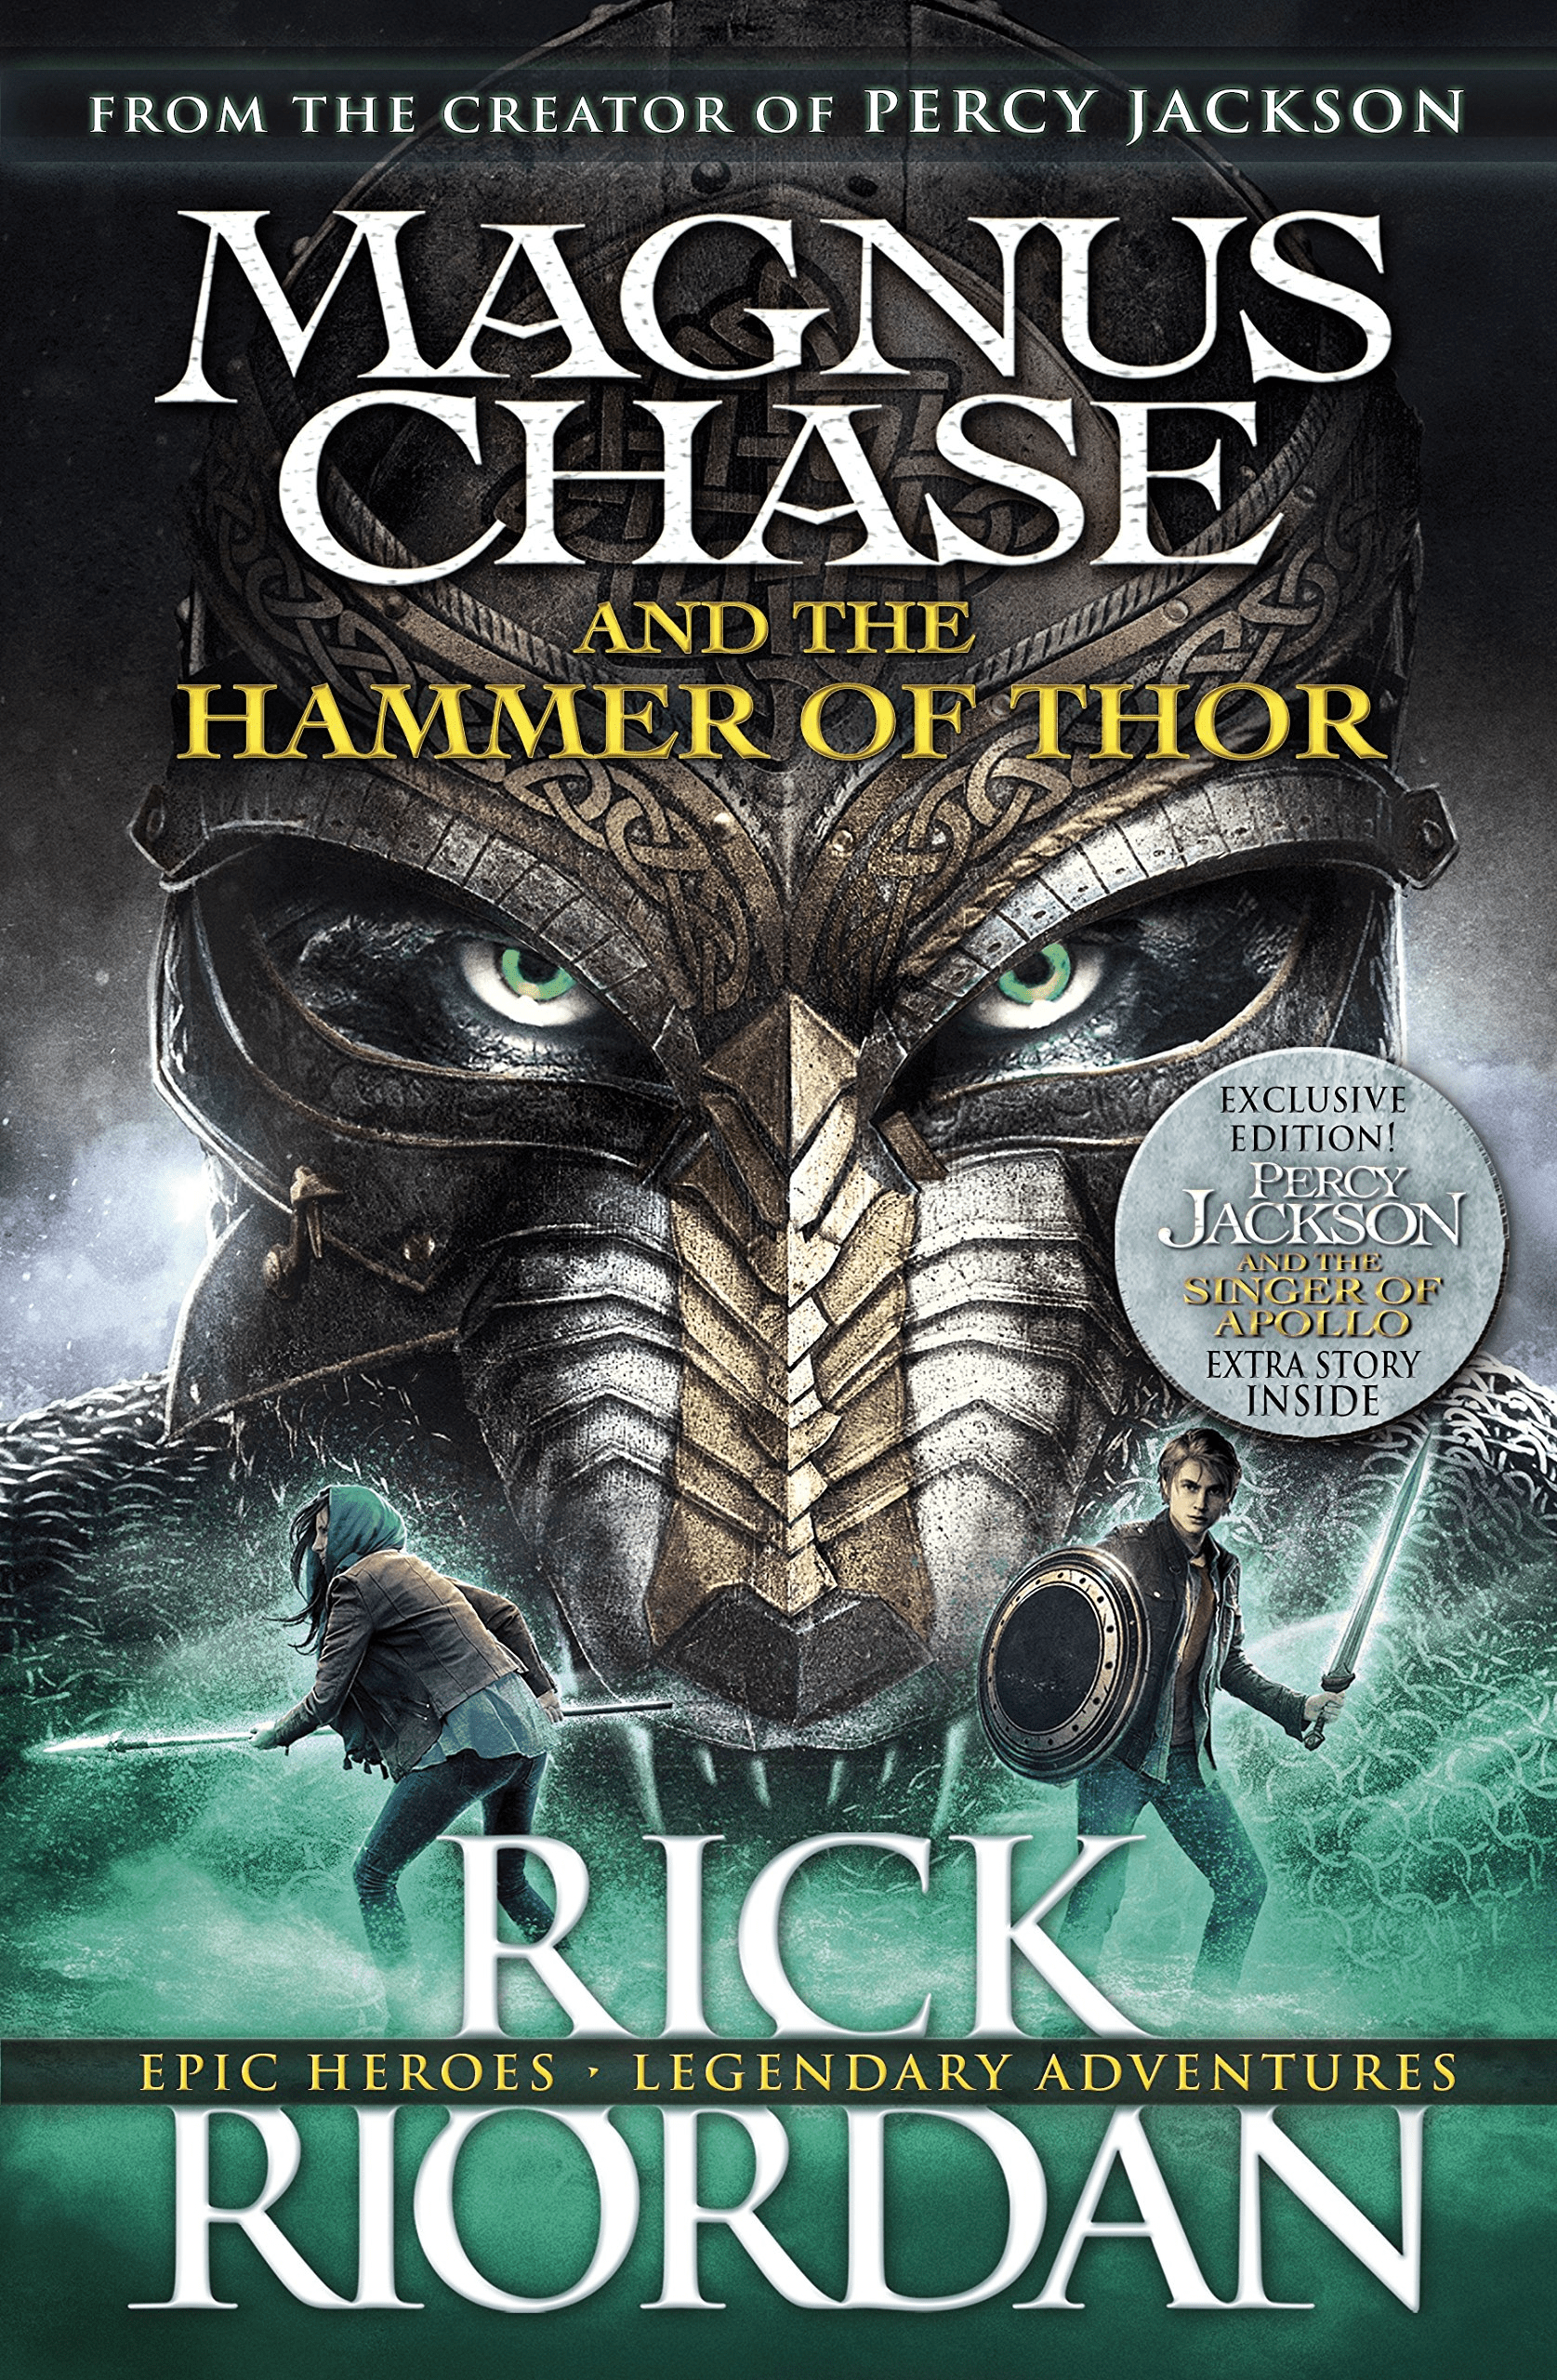 Magnus chase and the hammer of Thor by Rick Riordan